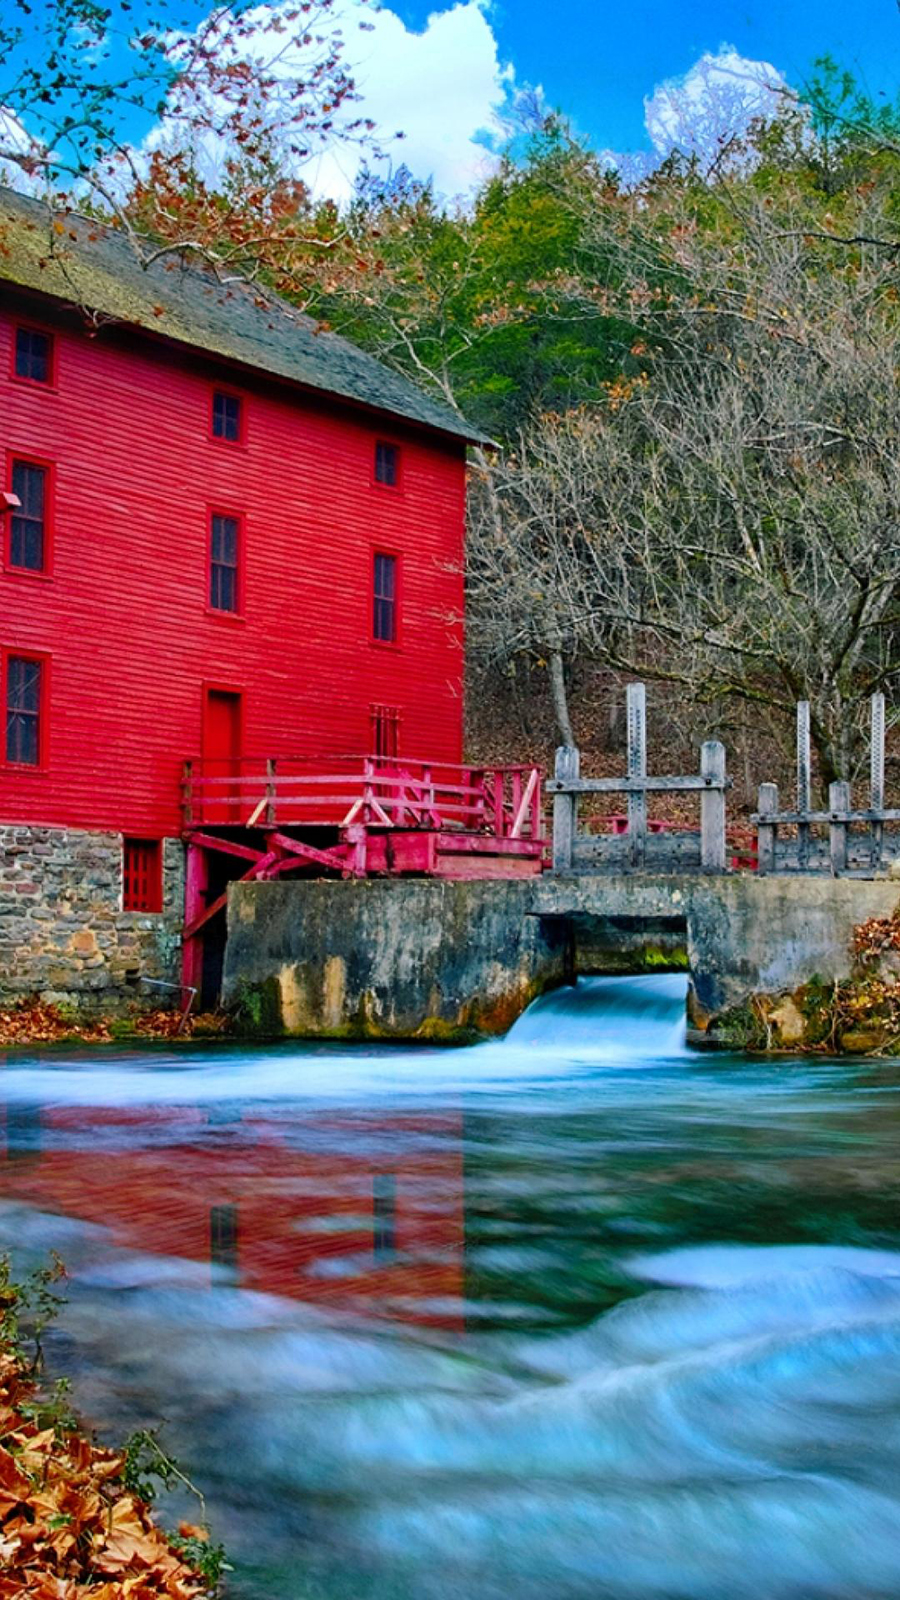 Red Mill Over Blue River Android Wallpaper